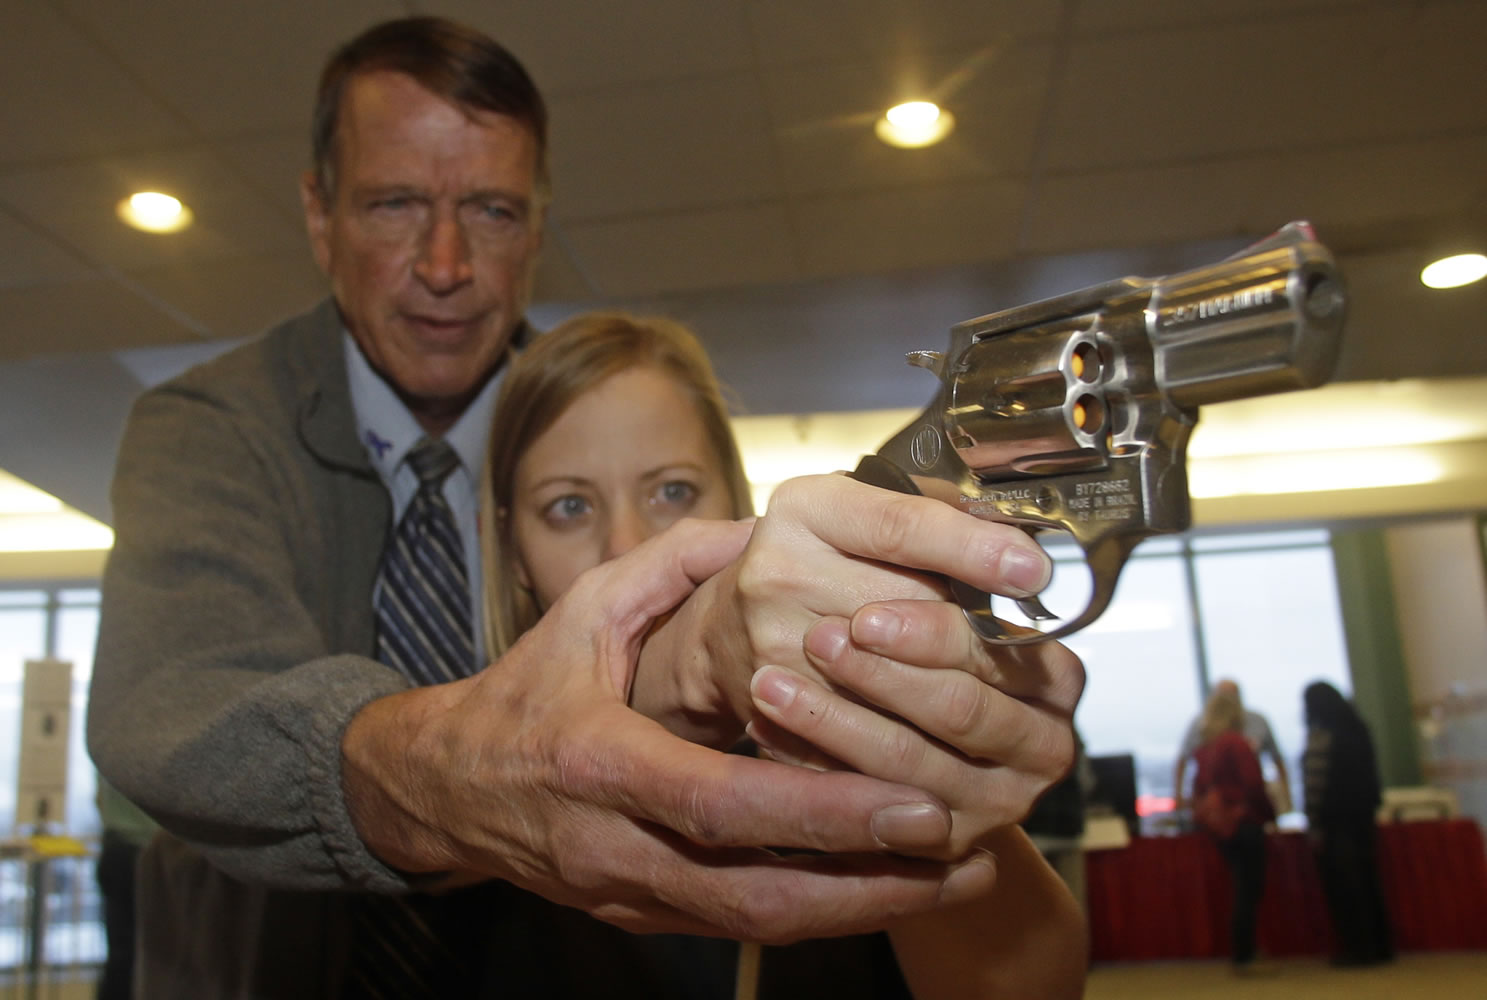 Cori Sorensen, a fourth-grade teacher from Highland Elementary School in Highland, Utah, gets training with a .357 magnum from personal defense instructor Jim McCarthy on Thursday during concealed weapons training for 200 Utah teachers in West Valley City, Utah.